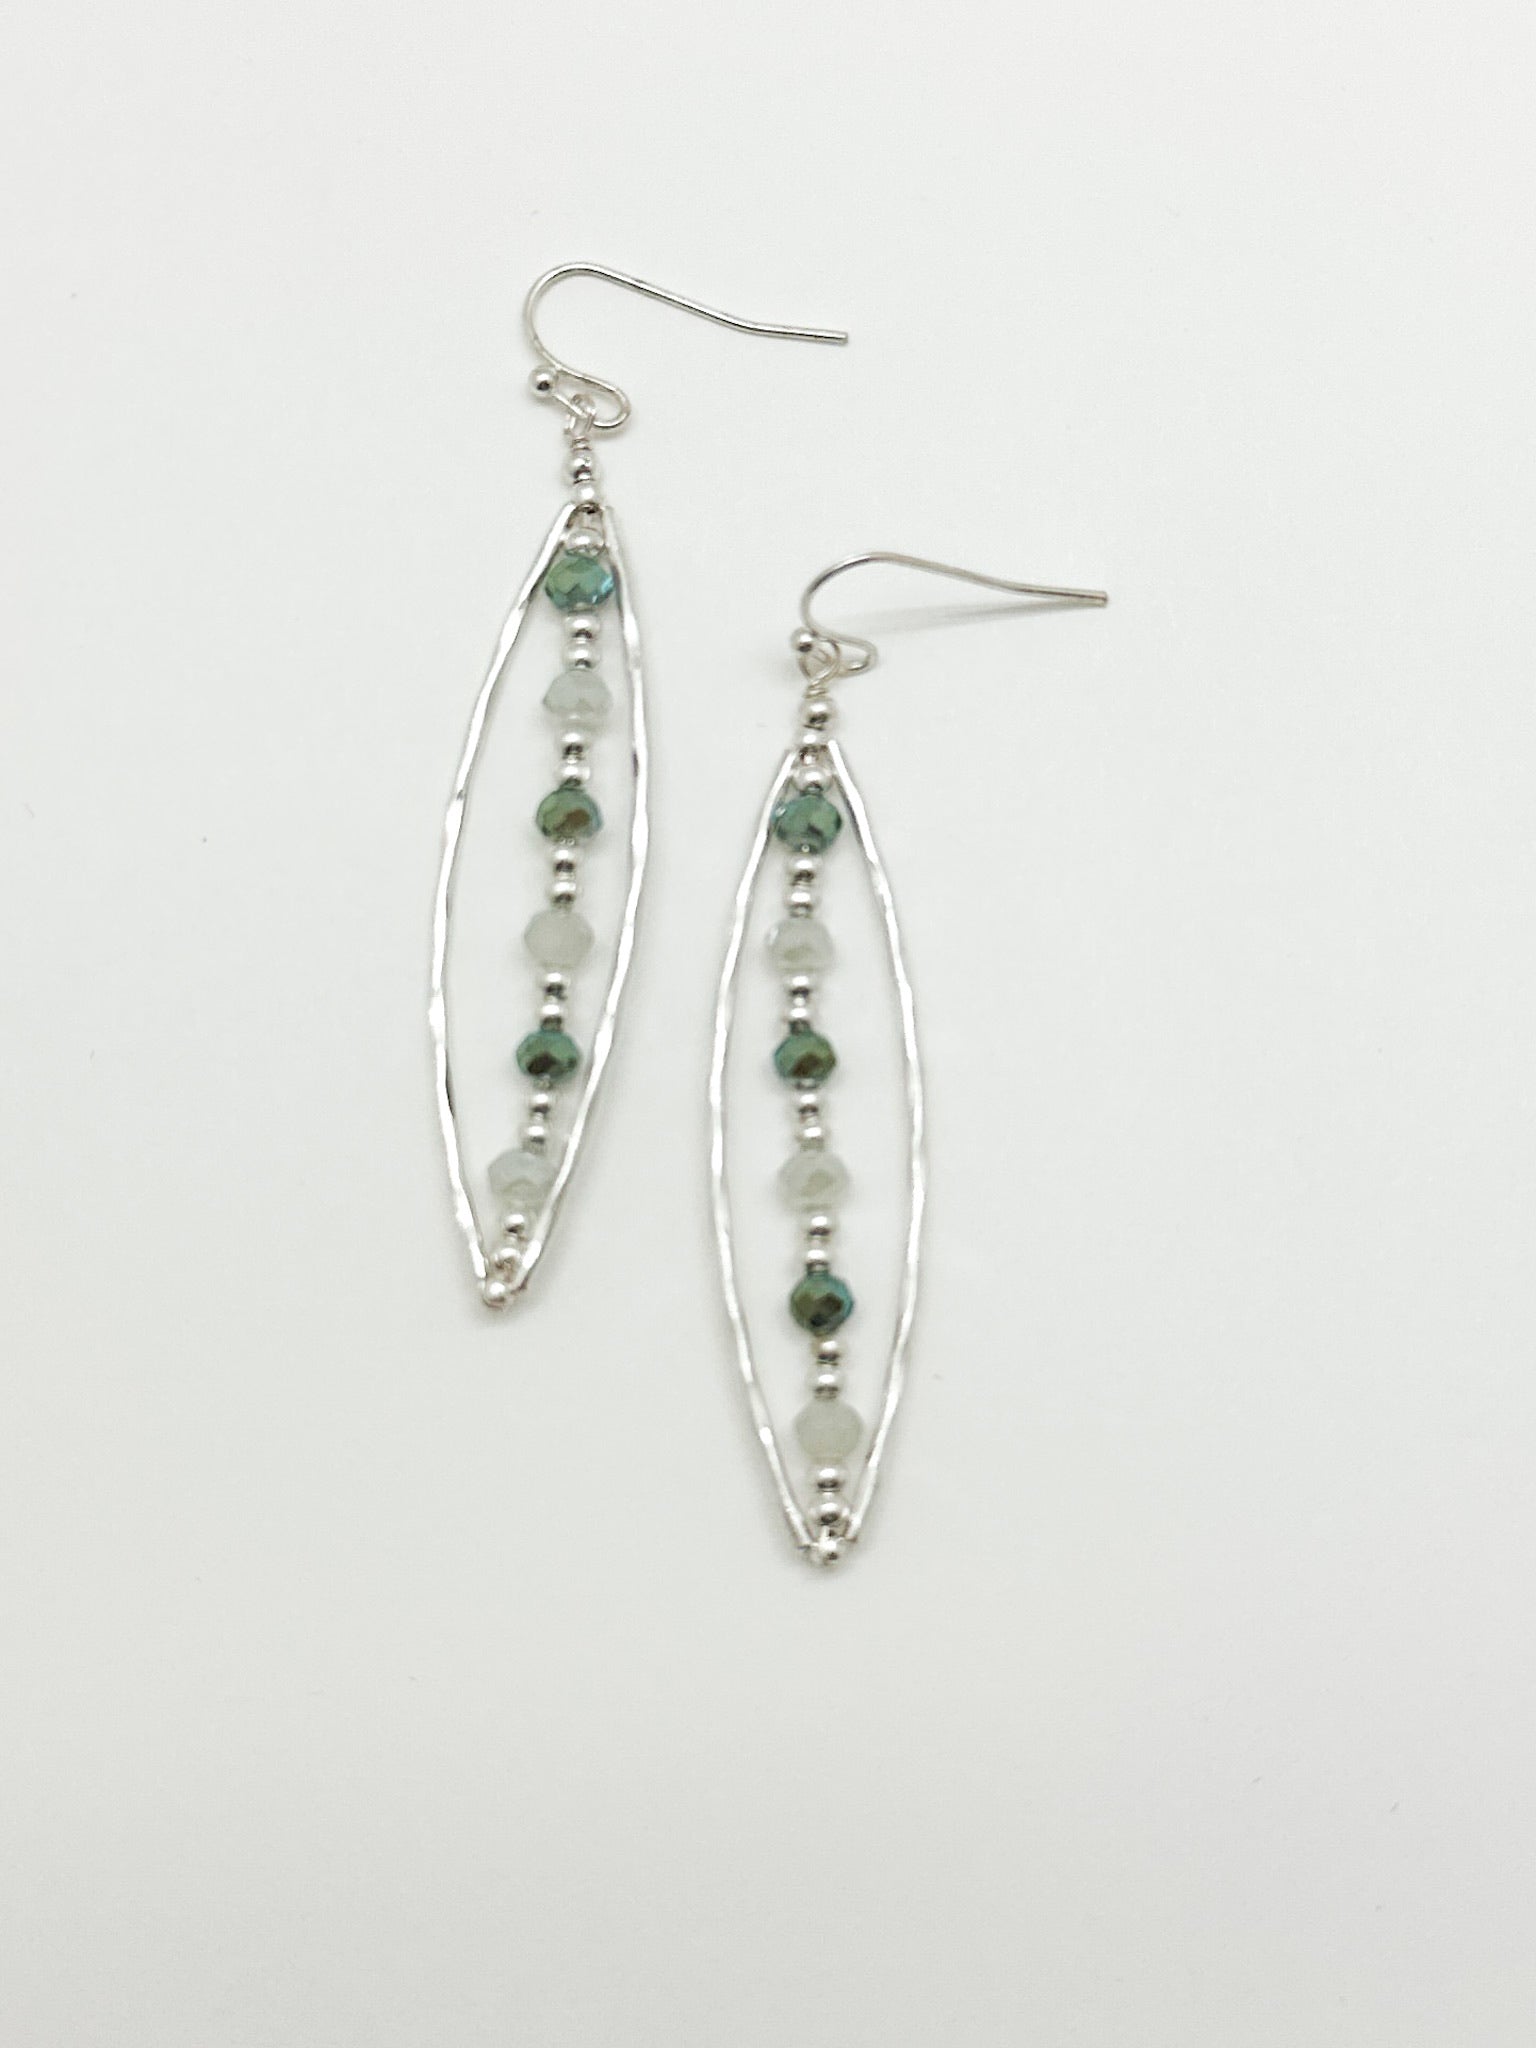 Bonnie Beaded silver earrings with green and silver beads that dangle